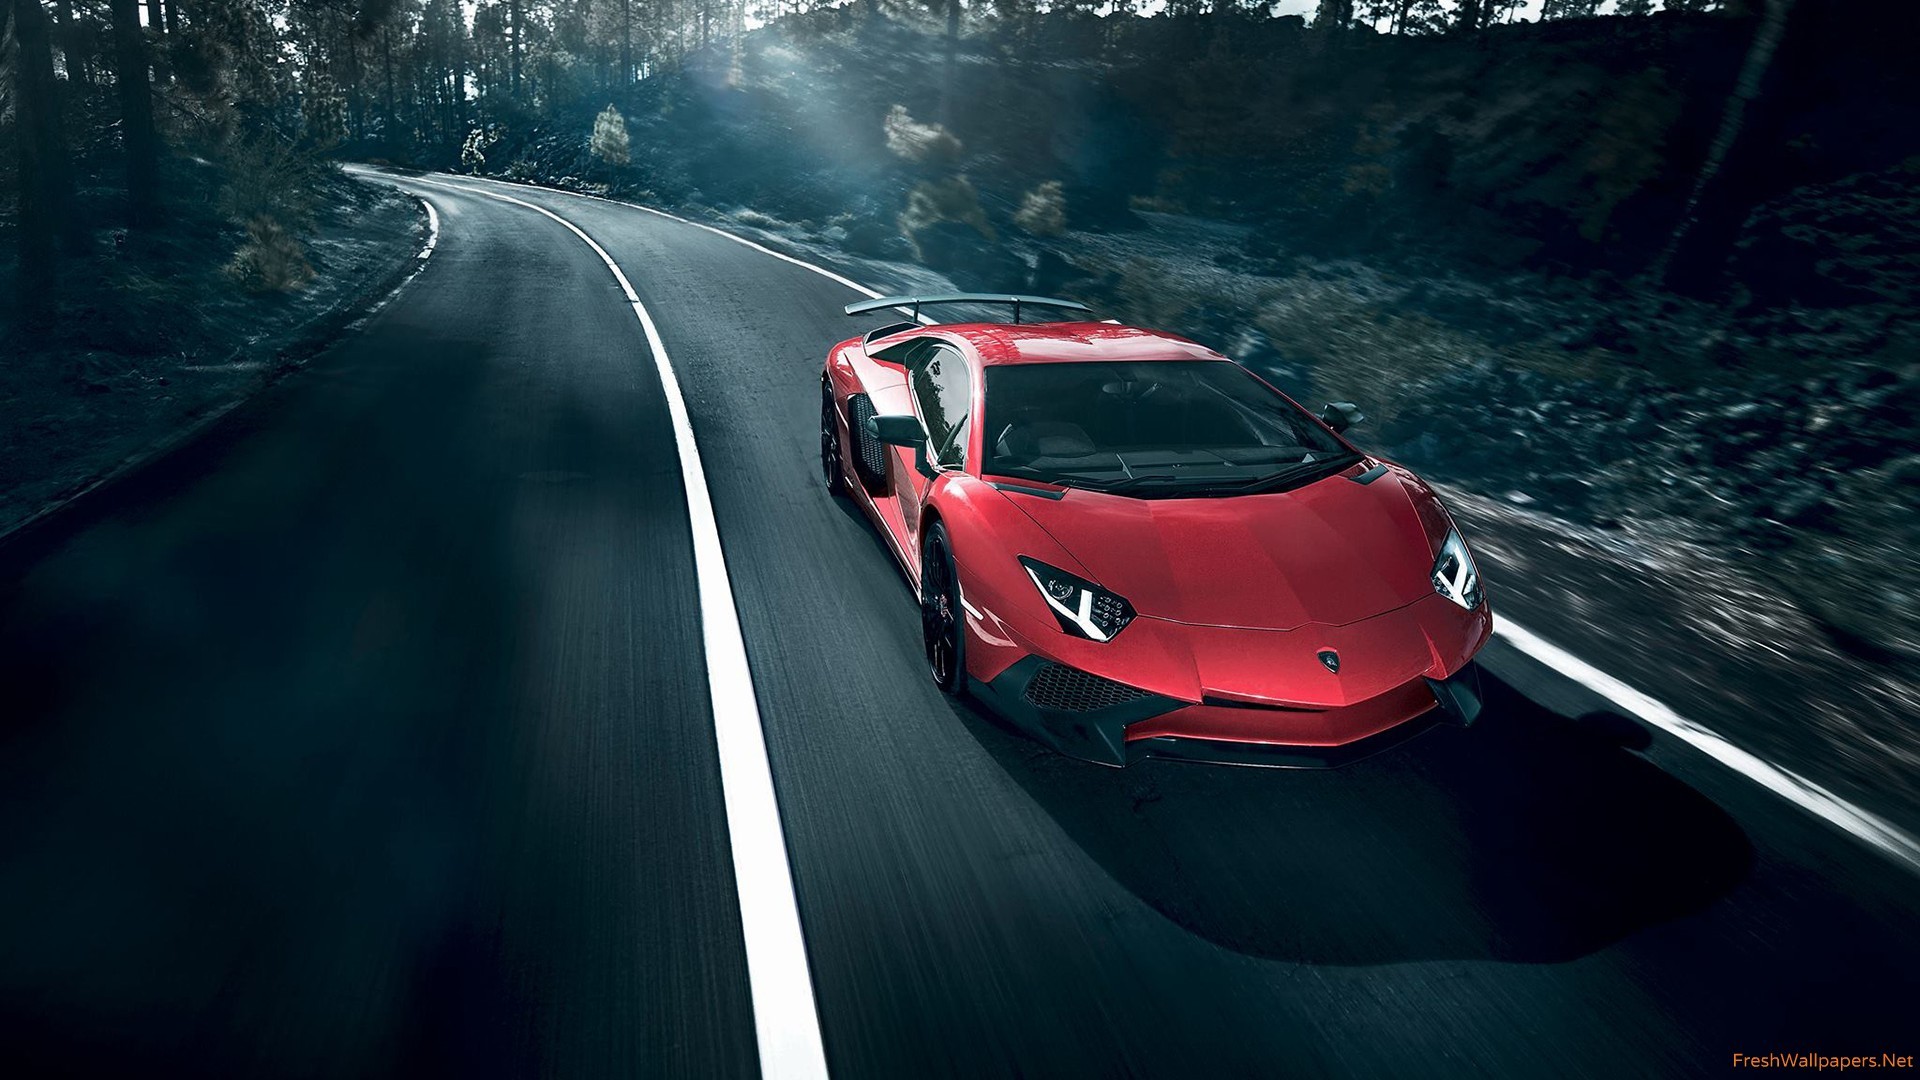 1920x1080 100% Quality Red Lamborghini HD Wallpapers - HD Wallpapers